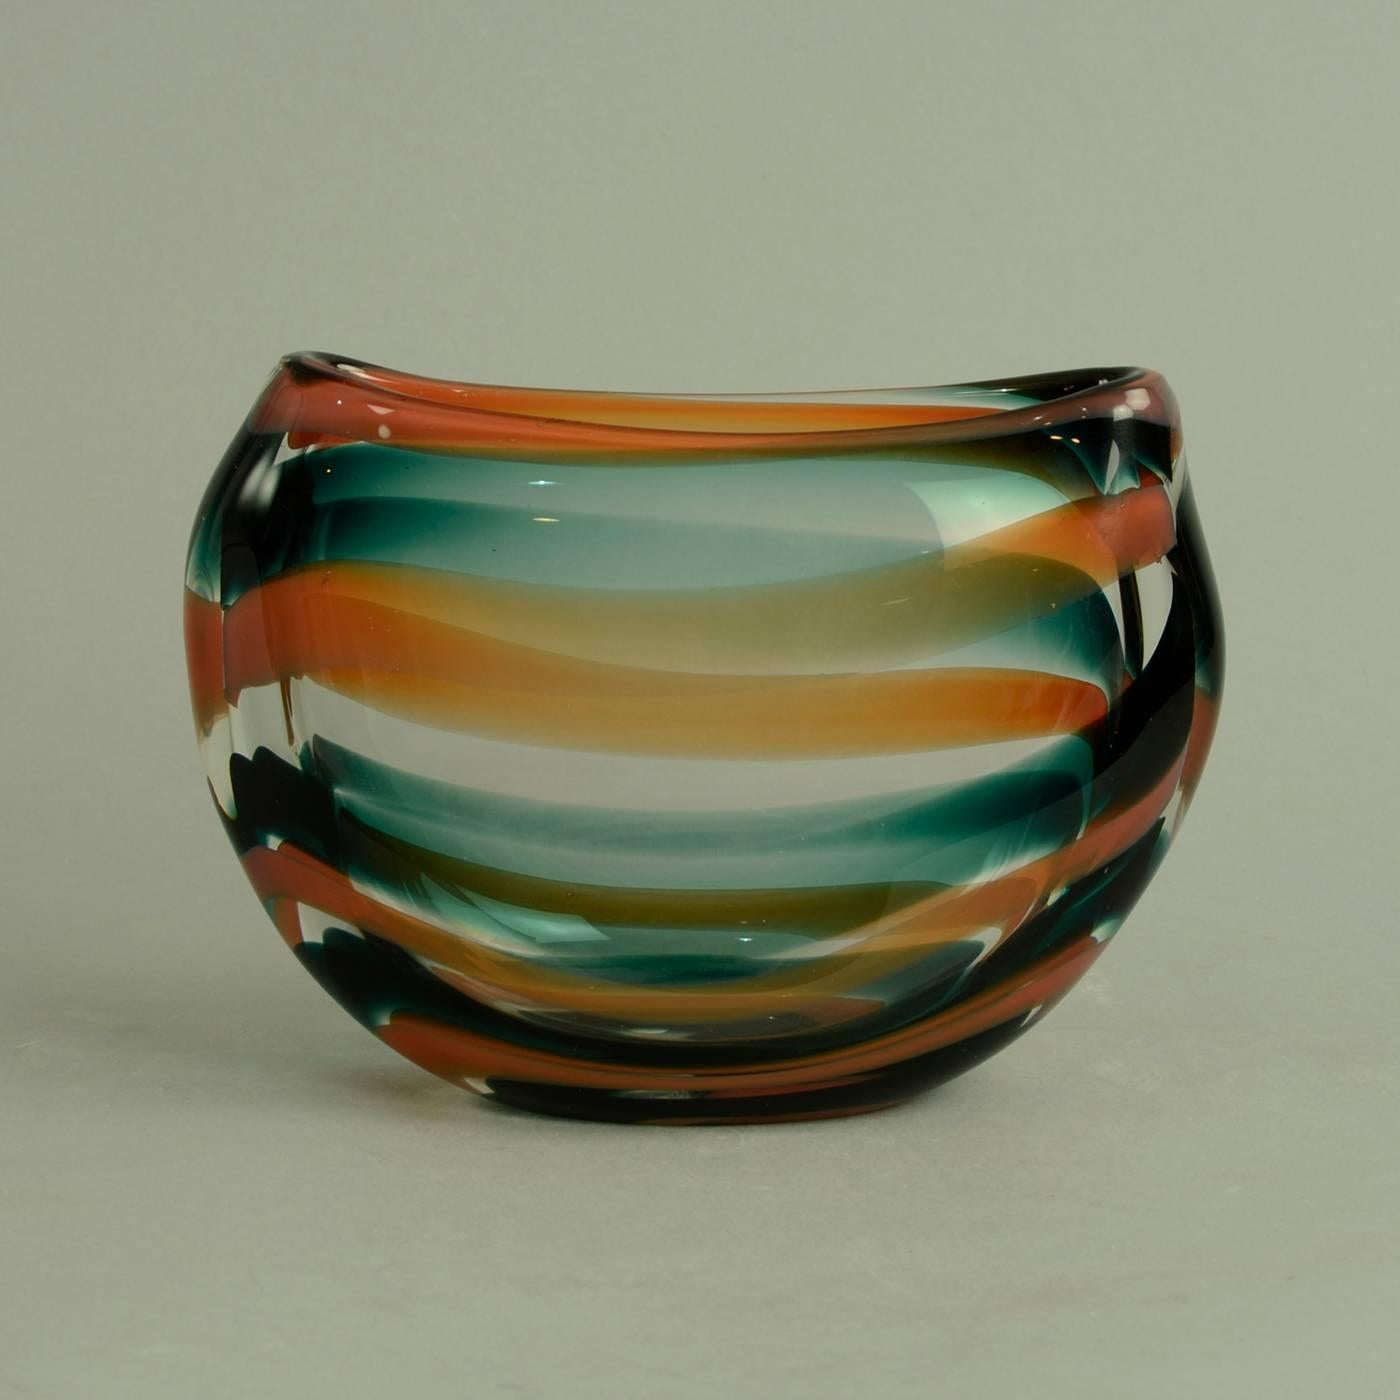 Glass Vase in Green, Orange and Clear Glass by Floris Meydam for Leerdam In Excellent Condition For Sale In New York, NY